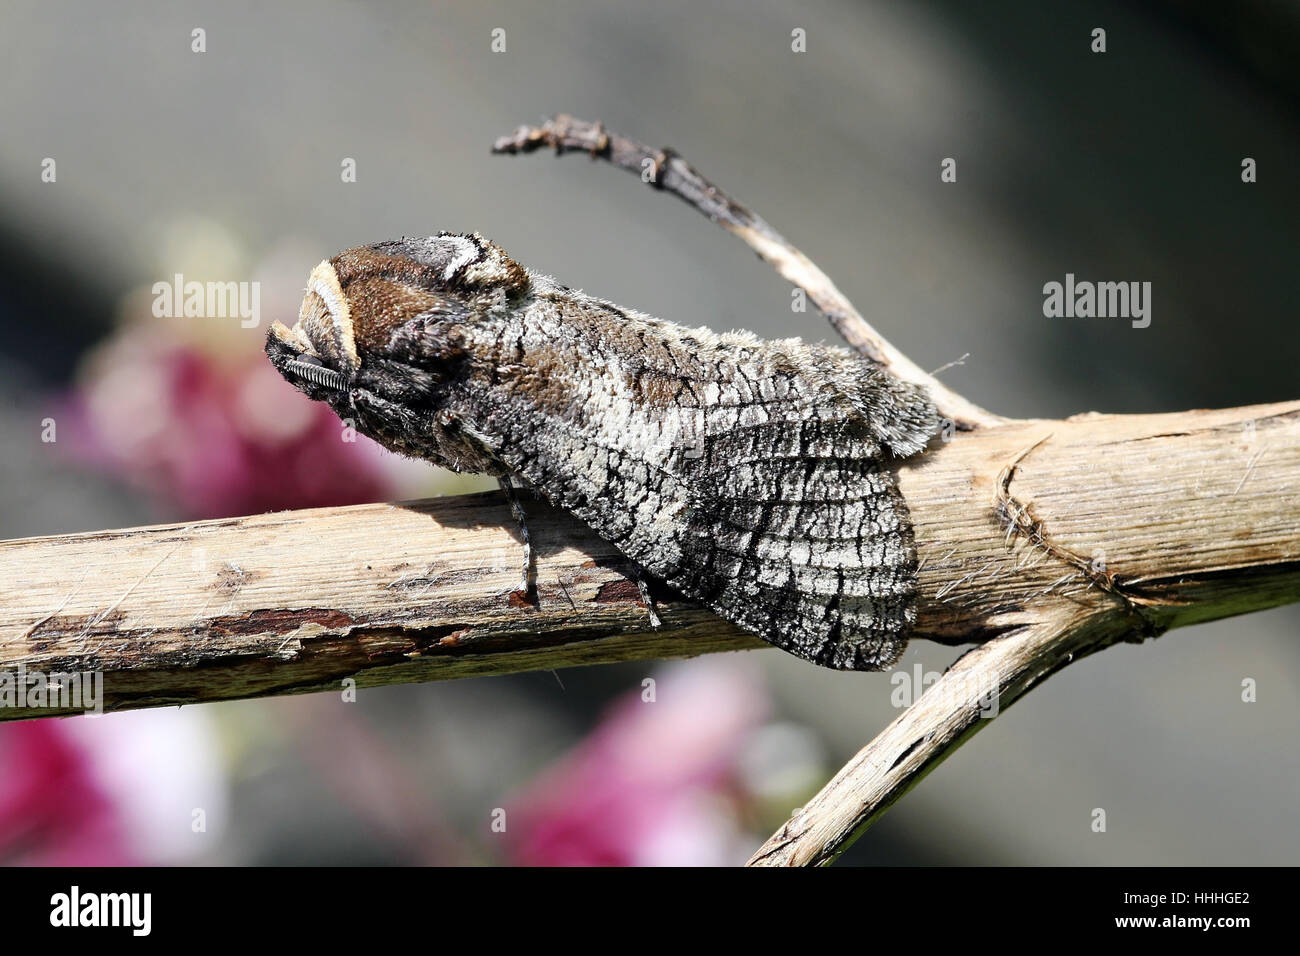 insect, butterfly, moth, wait, waiting, female, park, garden, insect, insects, Stock Photo